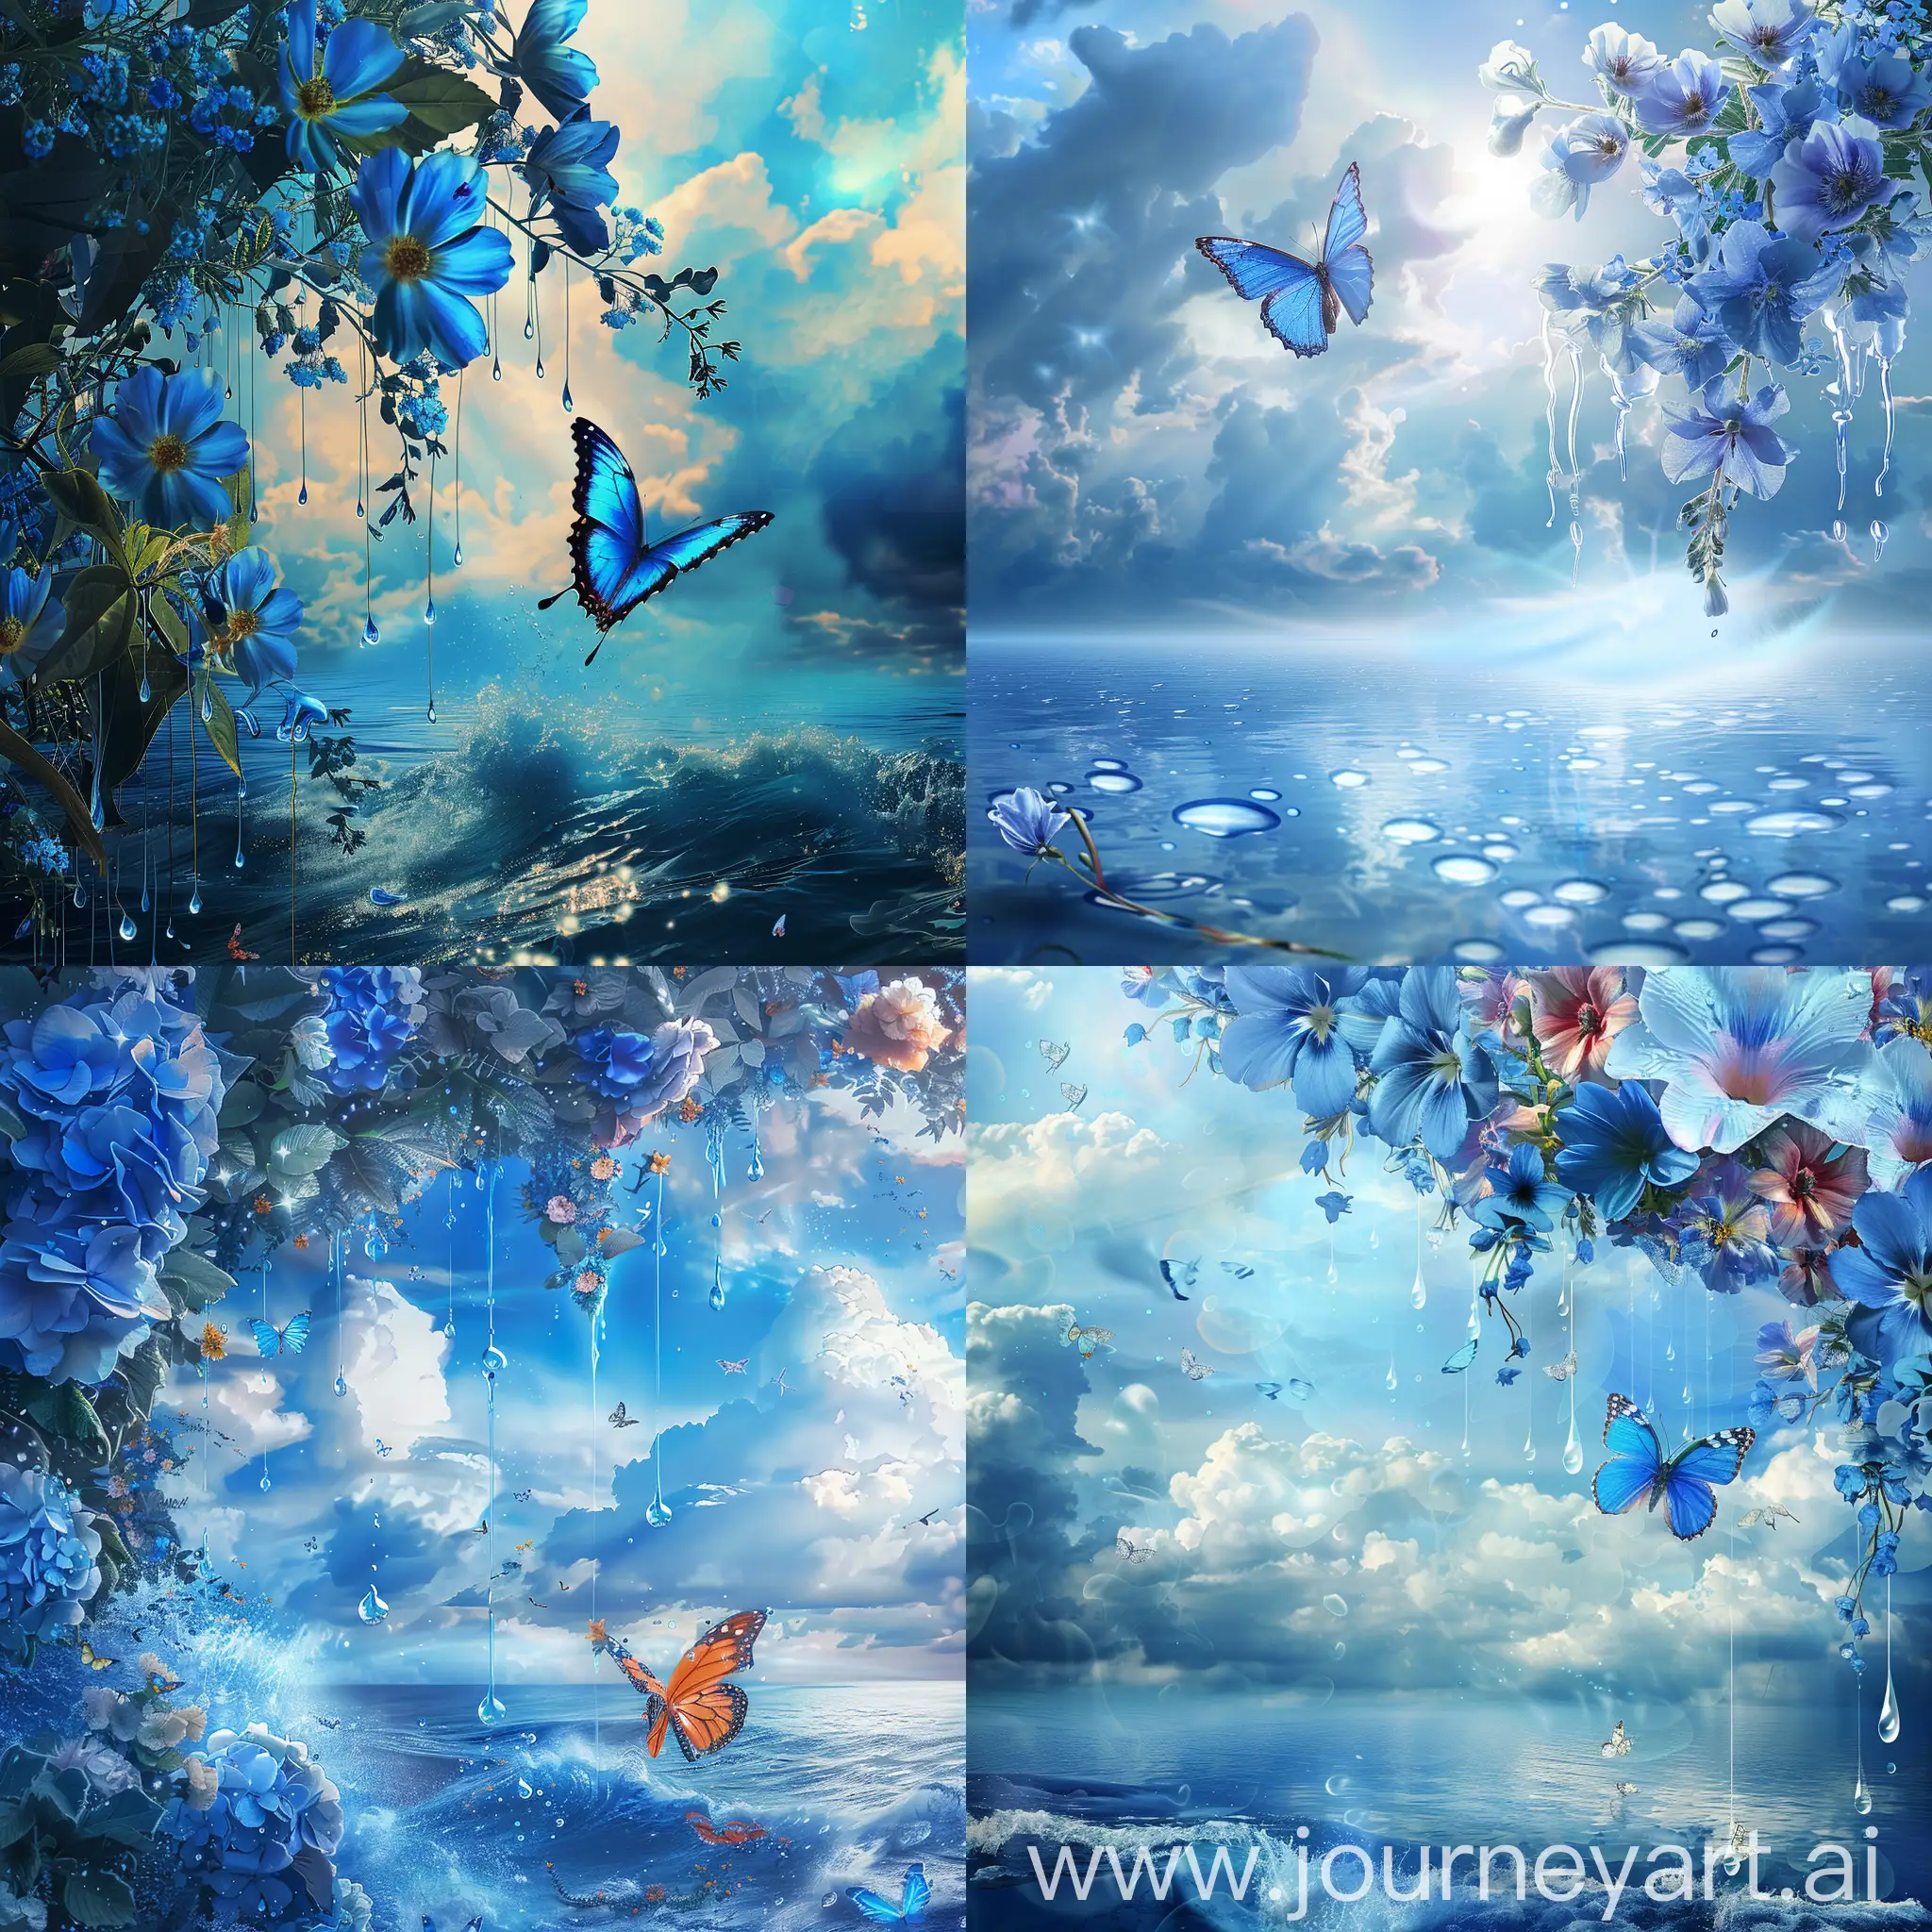 Serenity-in-Shades-of-Blue-Tranquil-Landscape-with-Flowers-and-Butterflies